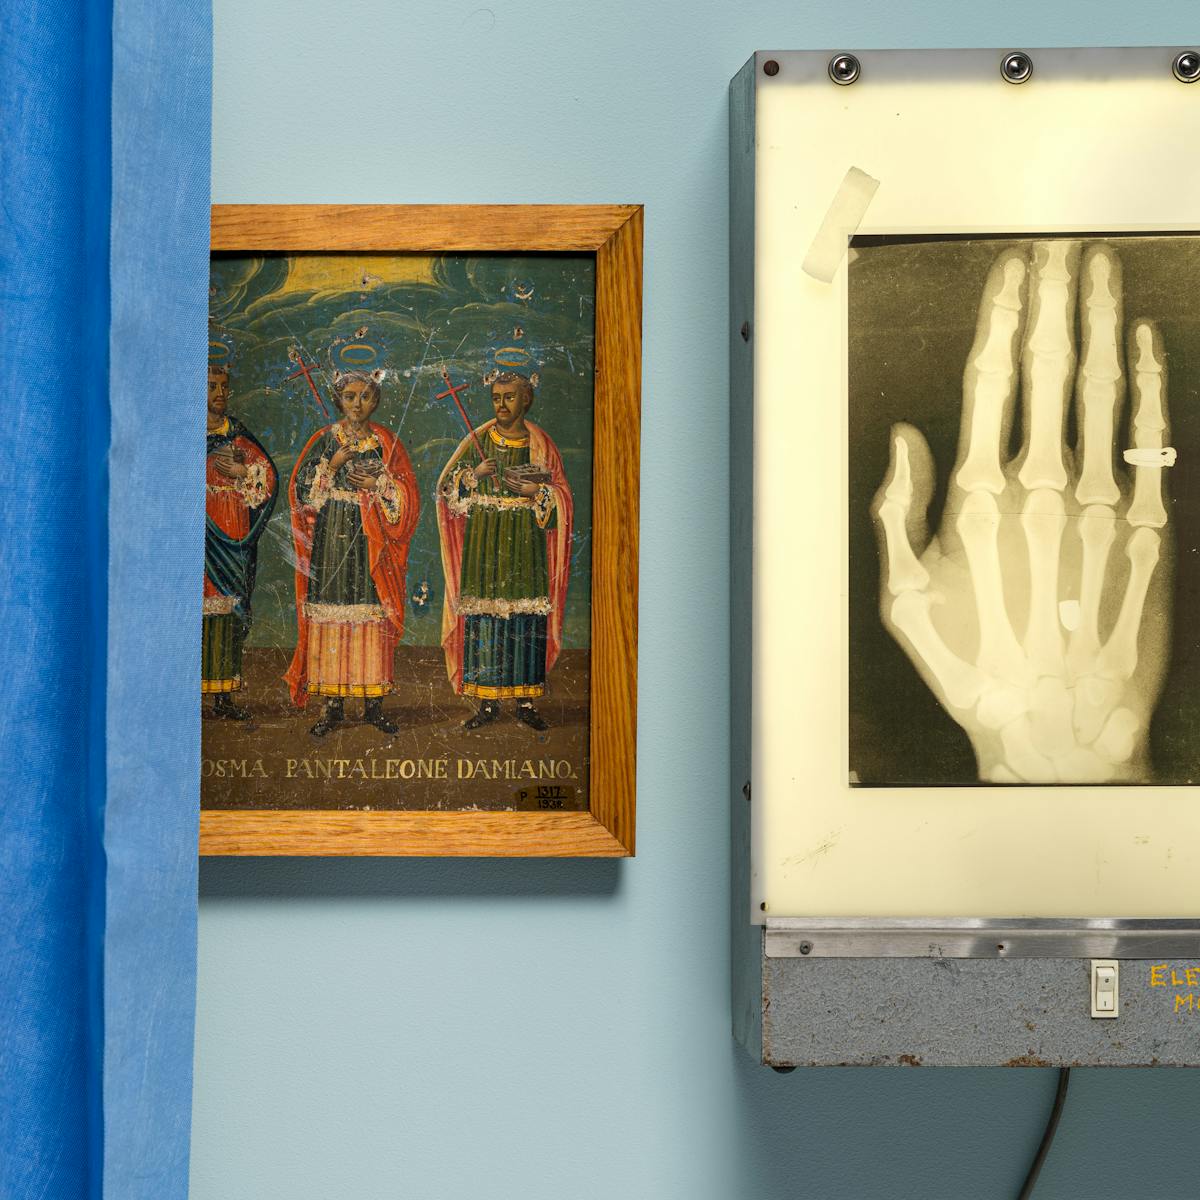 Photograph of an oil painting hung on a light blue wall, depicting 3 saints. The painting is partially hidden behind a blue concertina hospital ward curtain on the left of the frame. To the right is an x-ray lightbox also hung on the wall, with an x-ray of a hand taped to its surface. on the little finger of the hand you can see the outline of a ring. 